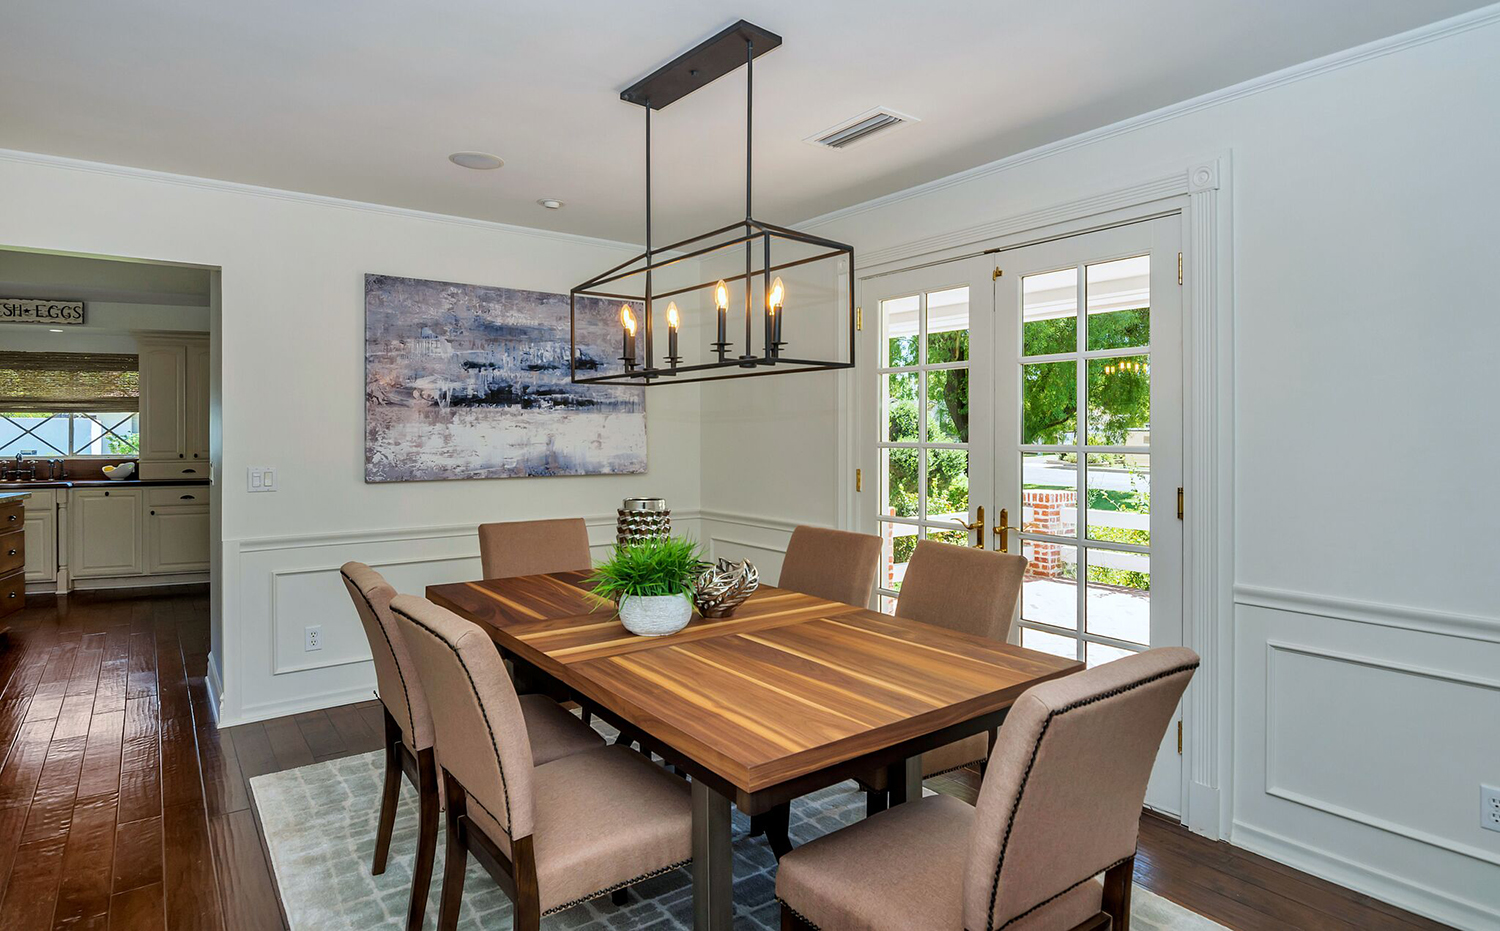 44_Dining-room-staging-company-Staged-to-Sell-Design-Scottsdale-AZ.jpg